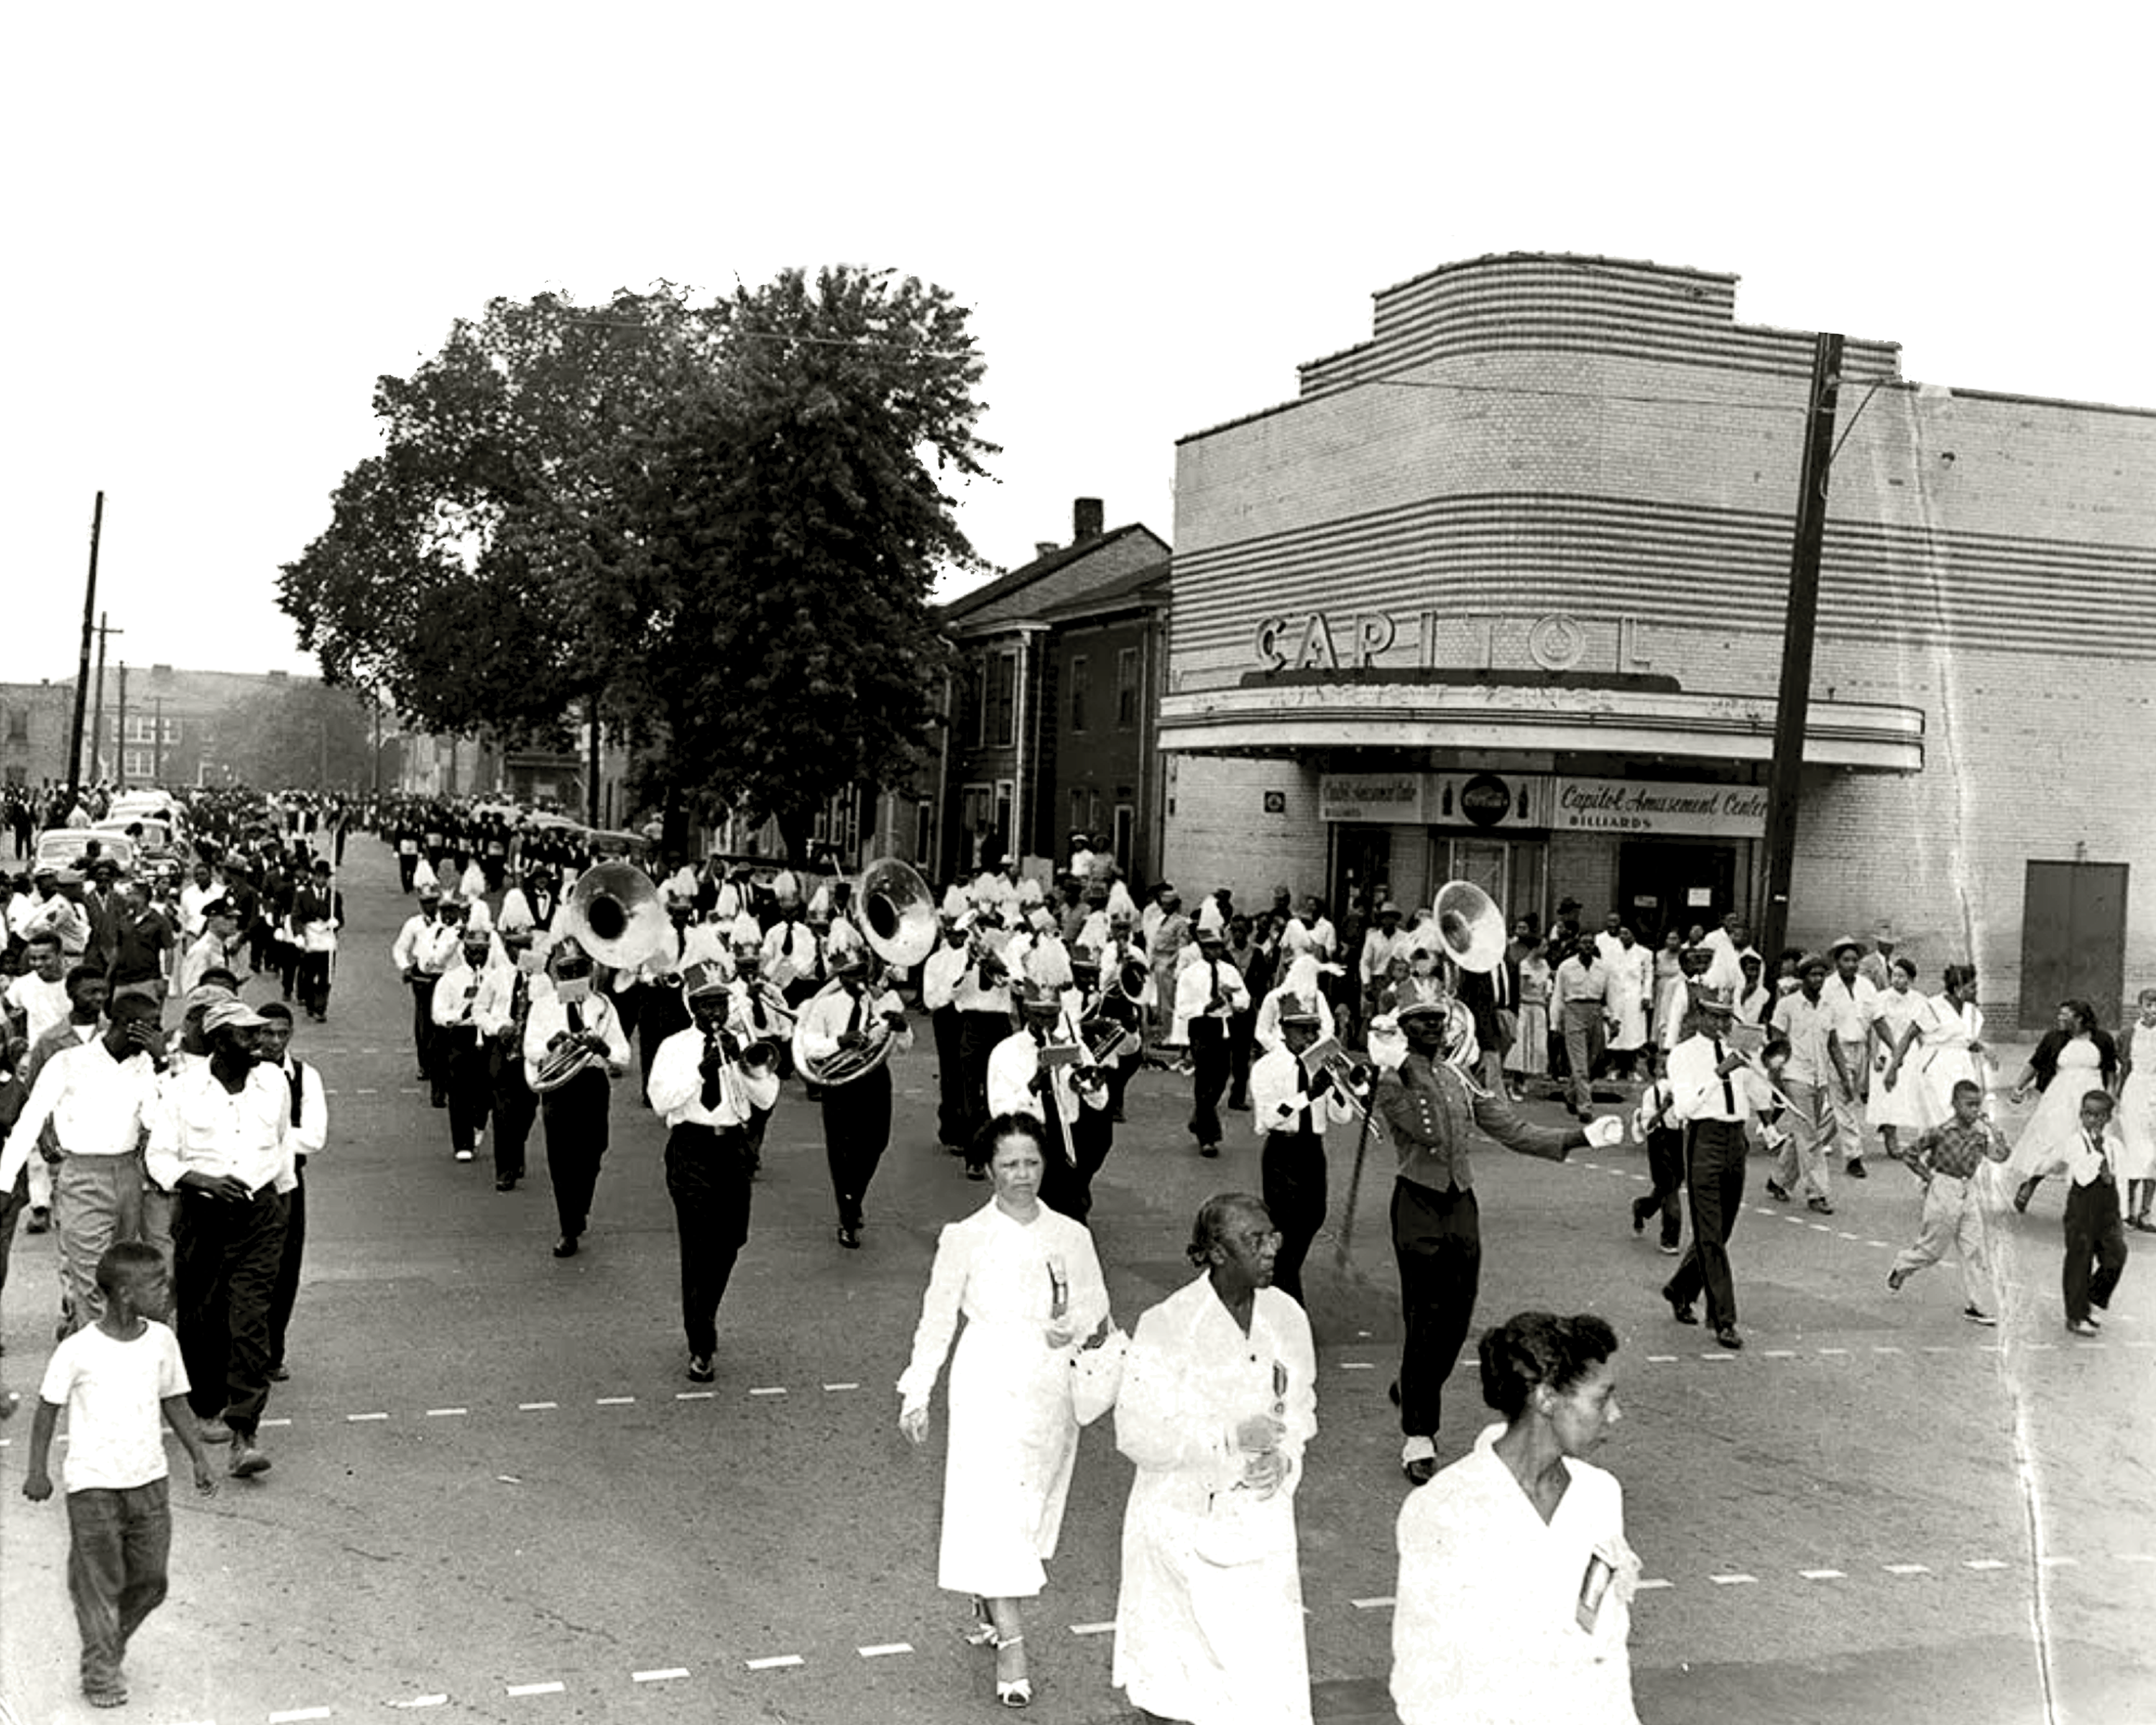 Parade along Queen Street, in front of the Capitol Theater. The Capitol was the first theater for Black patrons in Alexandria, and continued to serve the Black community throughout the era of segregation. Alexandria, 1950. Source: The American Legion William Thomas Post 129, photographer unknown.